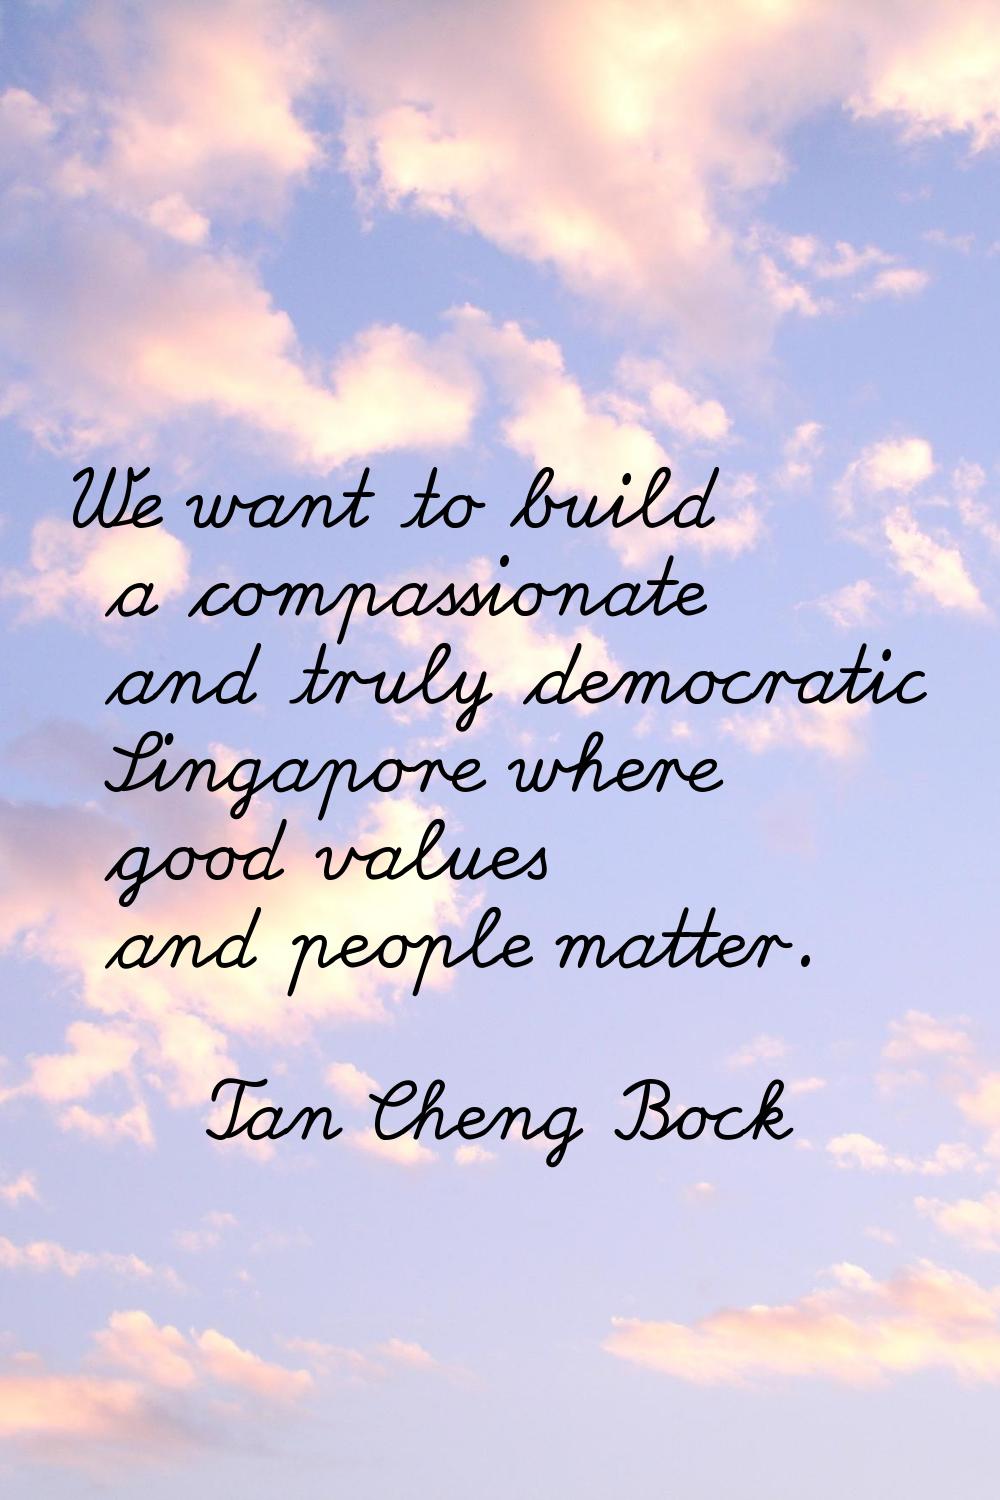 We want to build a compassionate and truly democratic Singapore where good values and people matter